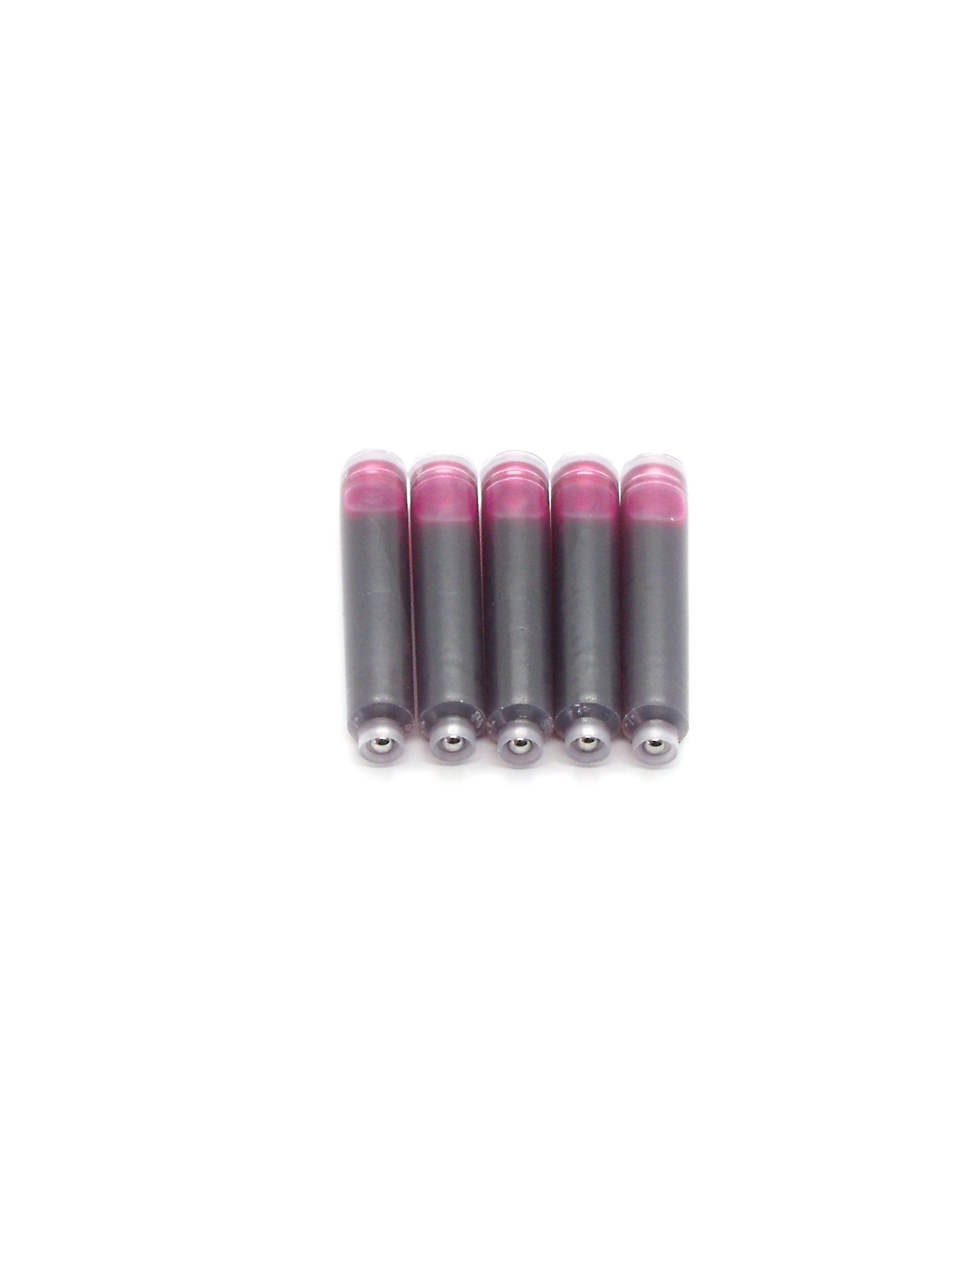 Top Ink Cartridges For Libelle Fountain Pens (Pink)